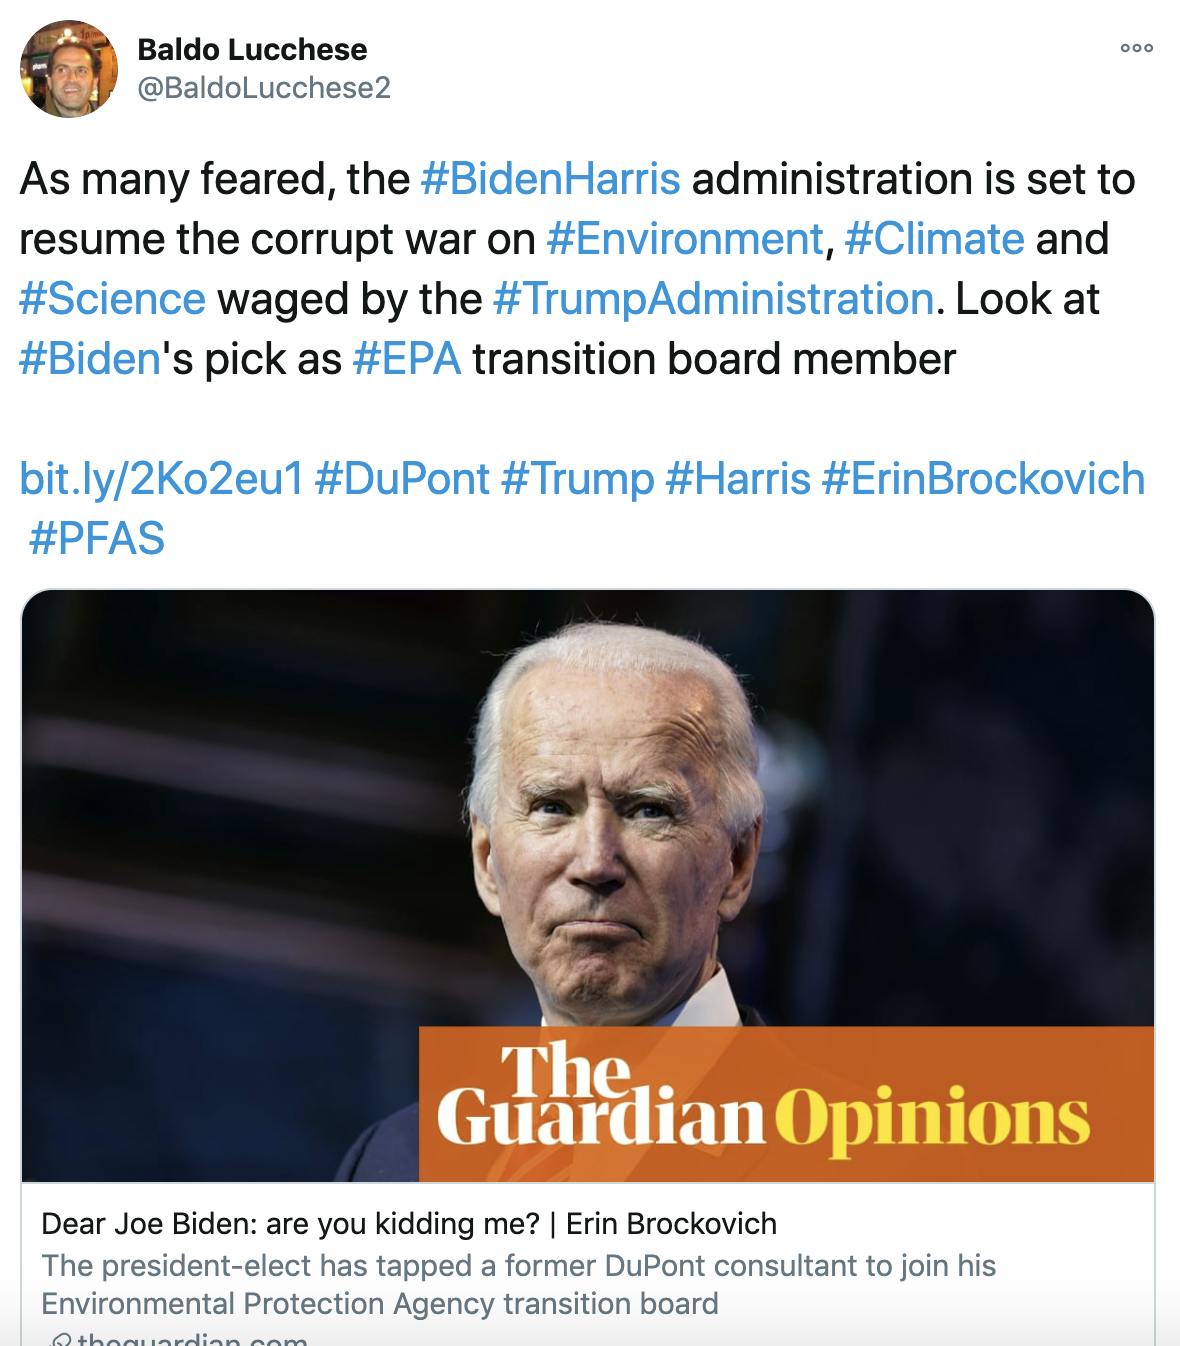 As many feared, the #BidenHarris administration is set to resume the corrupt war on #Environment, #Climate and #Science waged by the #TrumpAdministration. Look at #Biden's pick as #EPA transition board member https://bit.ly/2Ko2eu1 #DuPont #Trump #Harris #ErinBrockovich #PFAS